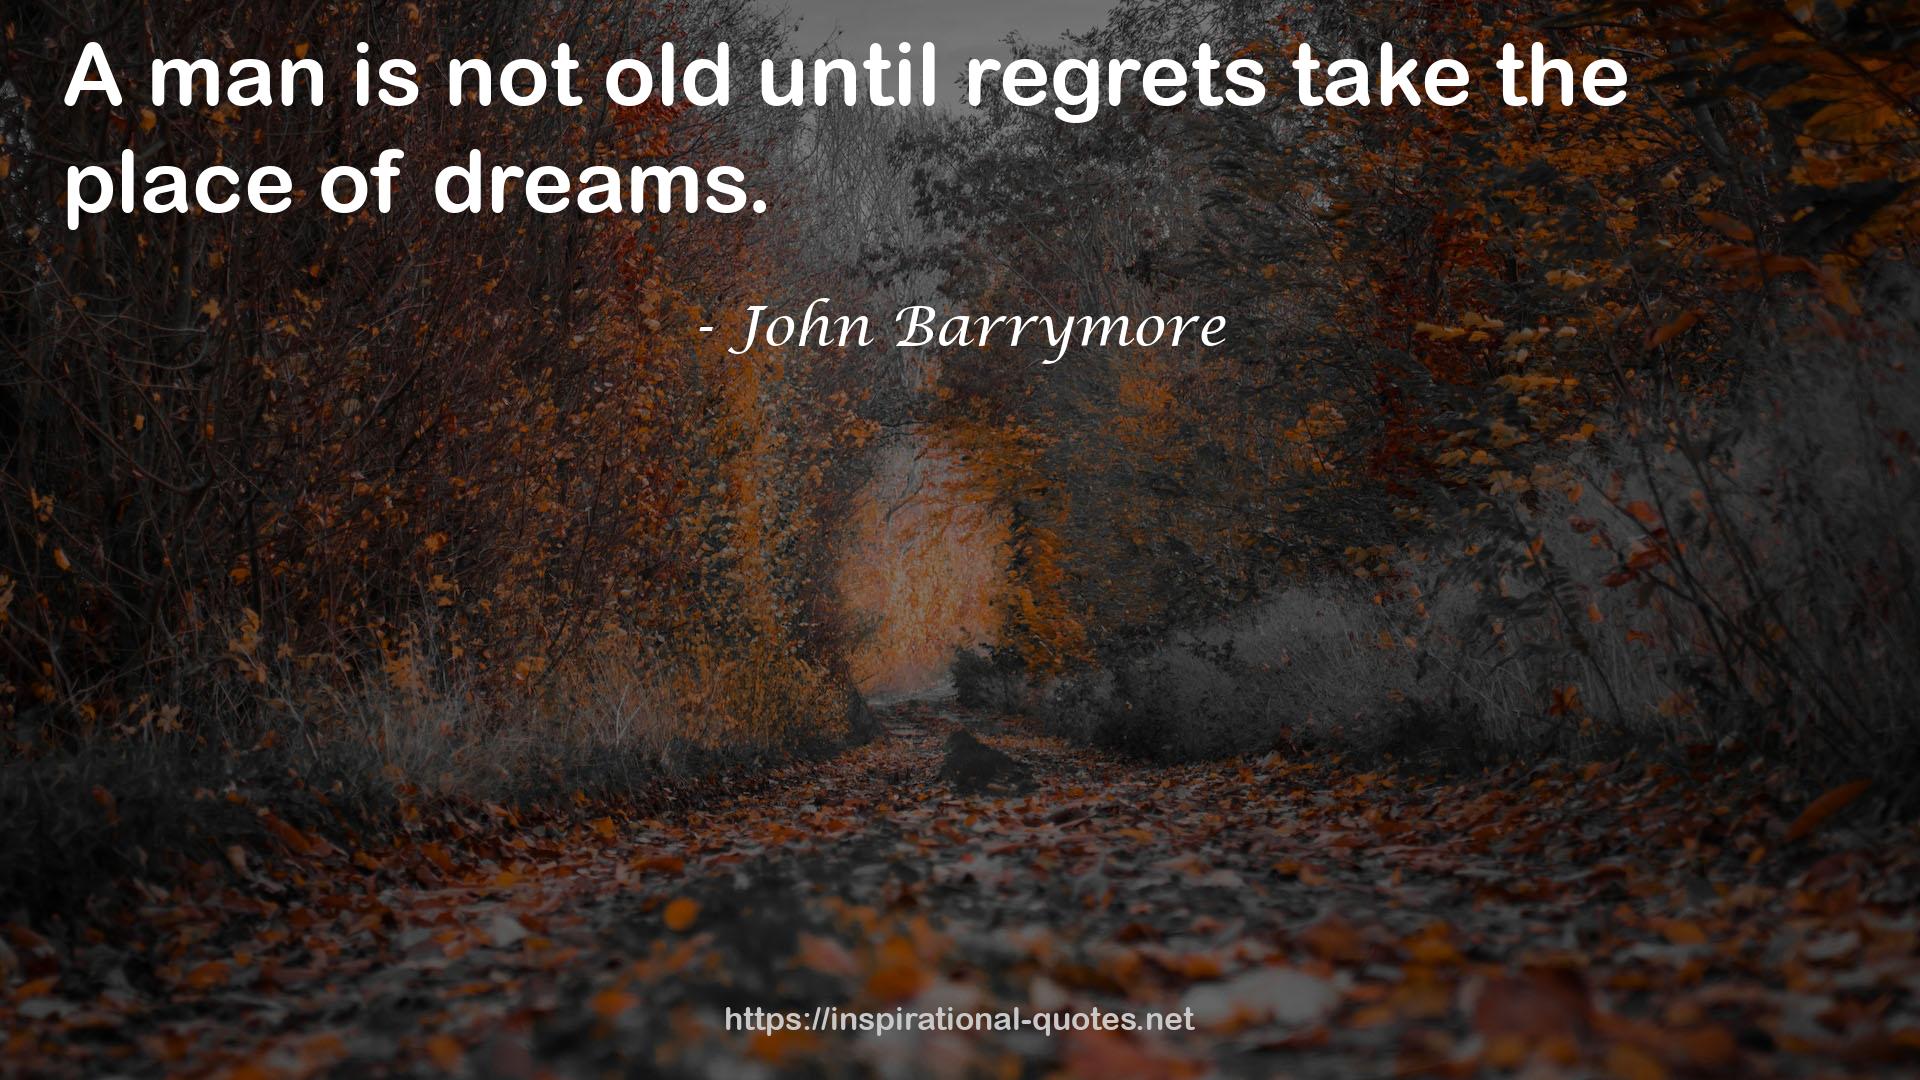 John Barrymore QUOTES